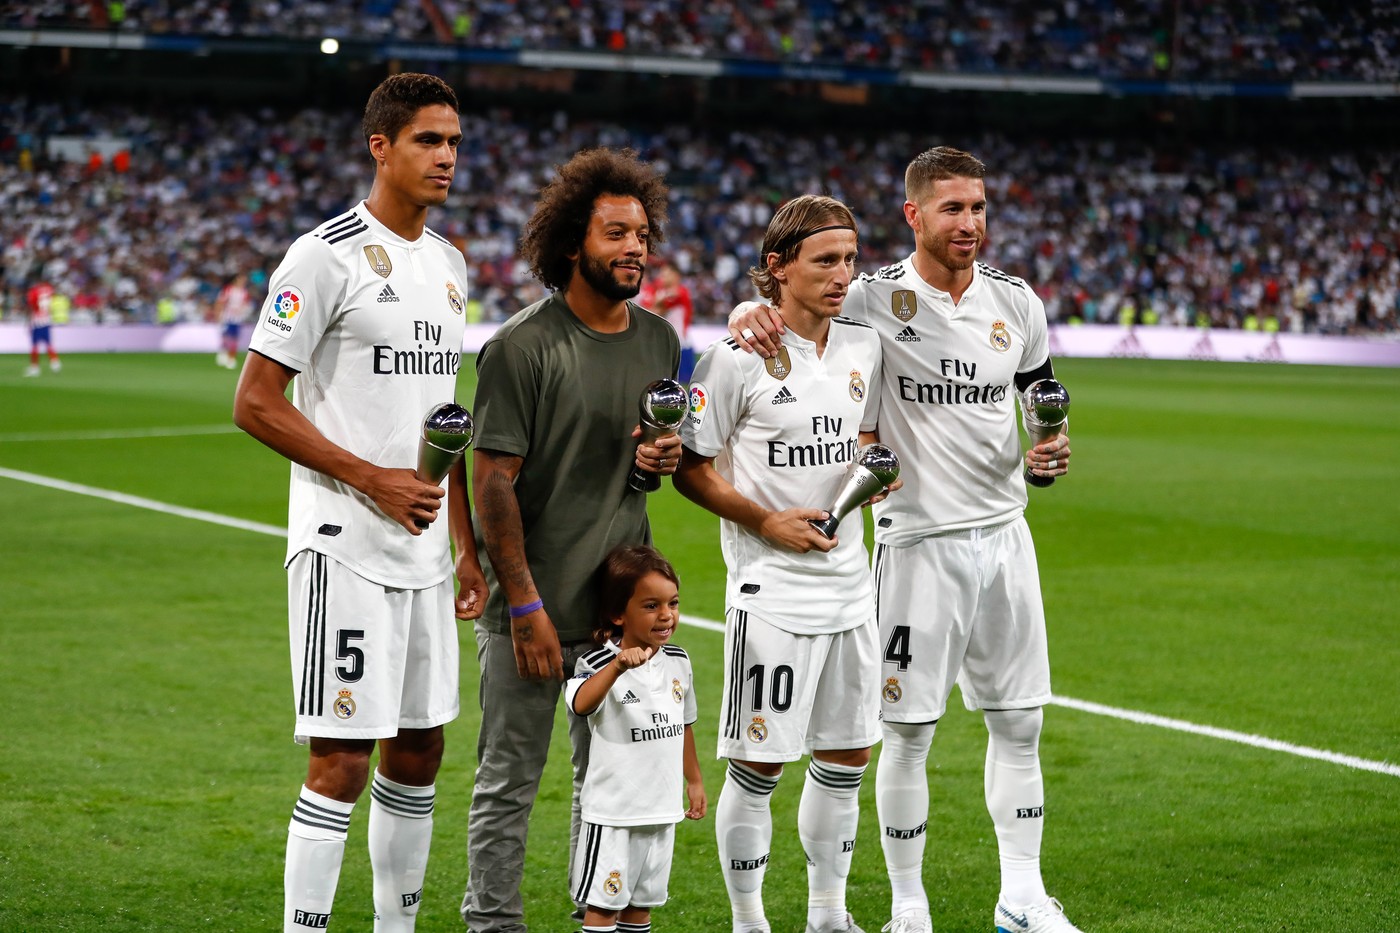 September 29, 2018 - Raphael Varane, Marcelo, Luka Modric and Sergio Ramos of Real Madrid with trophy during the La Liga (Spanish Championship) football match between Real Madrid and Atletico de Madrid on September 29th, 2018 at Santiago Bernabeu stadium in Madrid, Spain.,Image: 389062959, License: Rights-managed, Restrictions: , Model Release: no, Credit line: AFP7 / Zuma Press / Profimedia